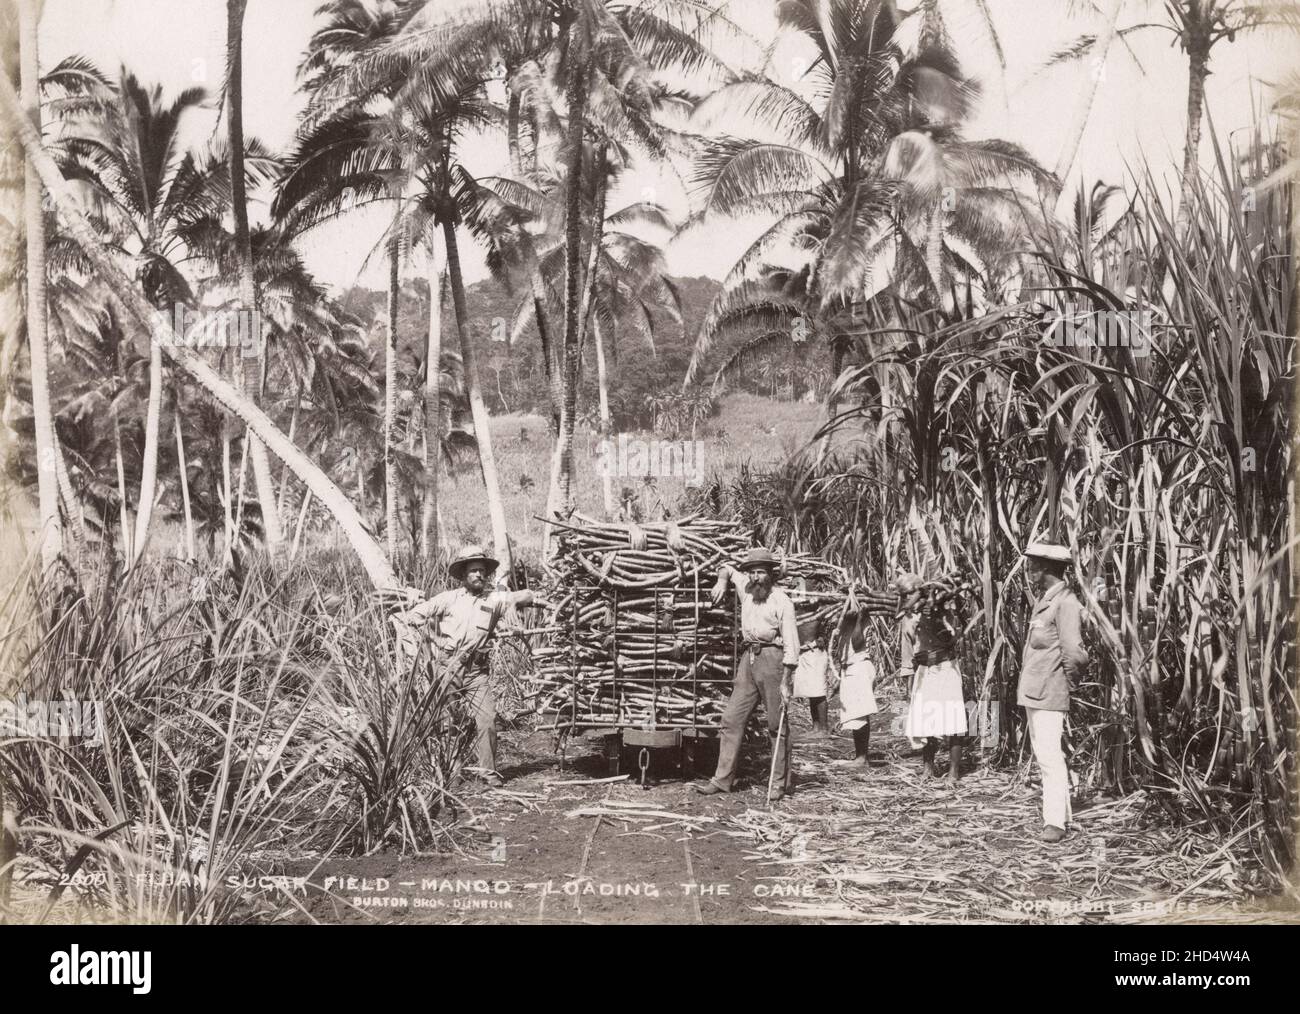 Vintage late 19th century photograph: Loading sugar cane, farming in ...